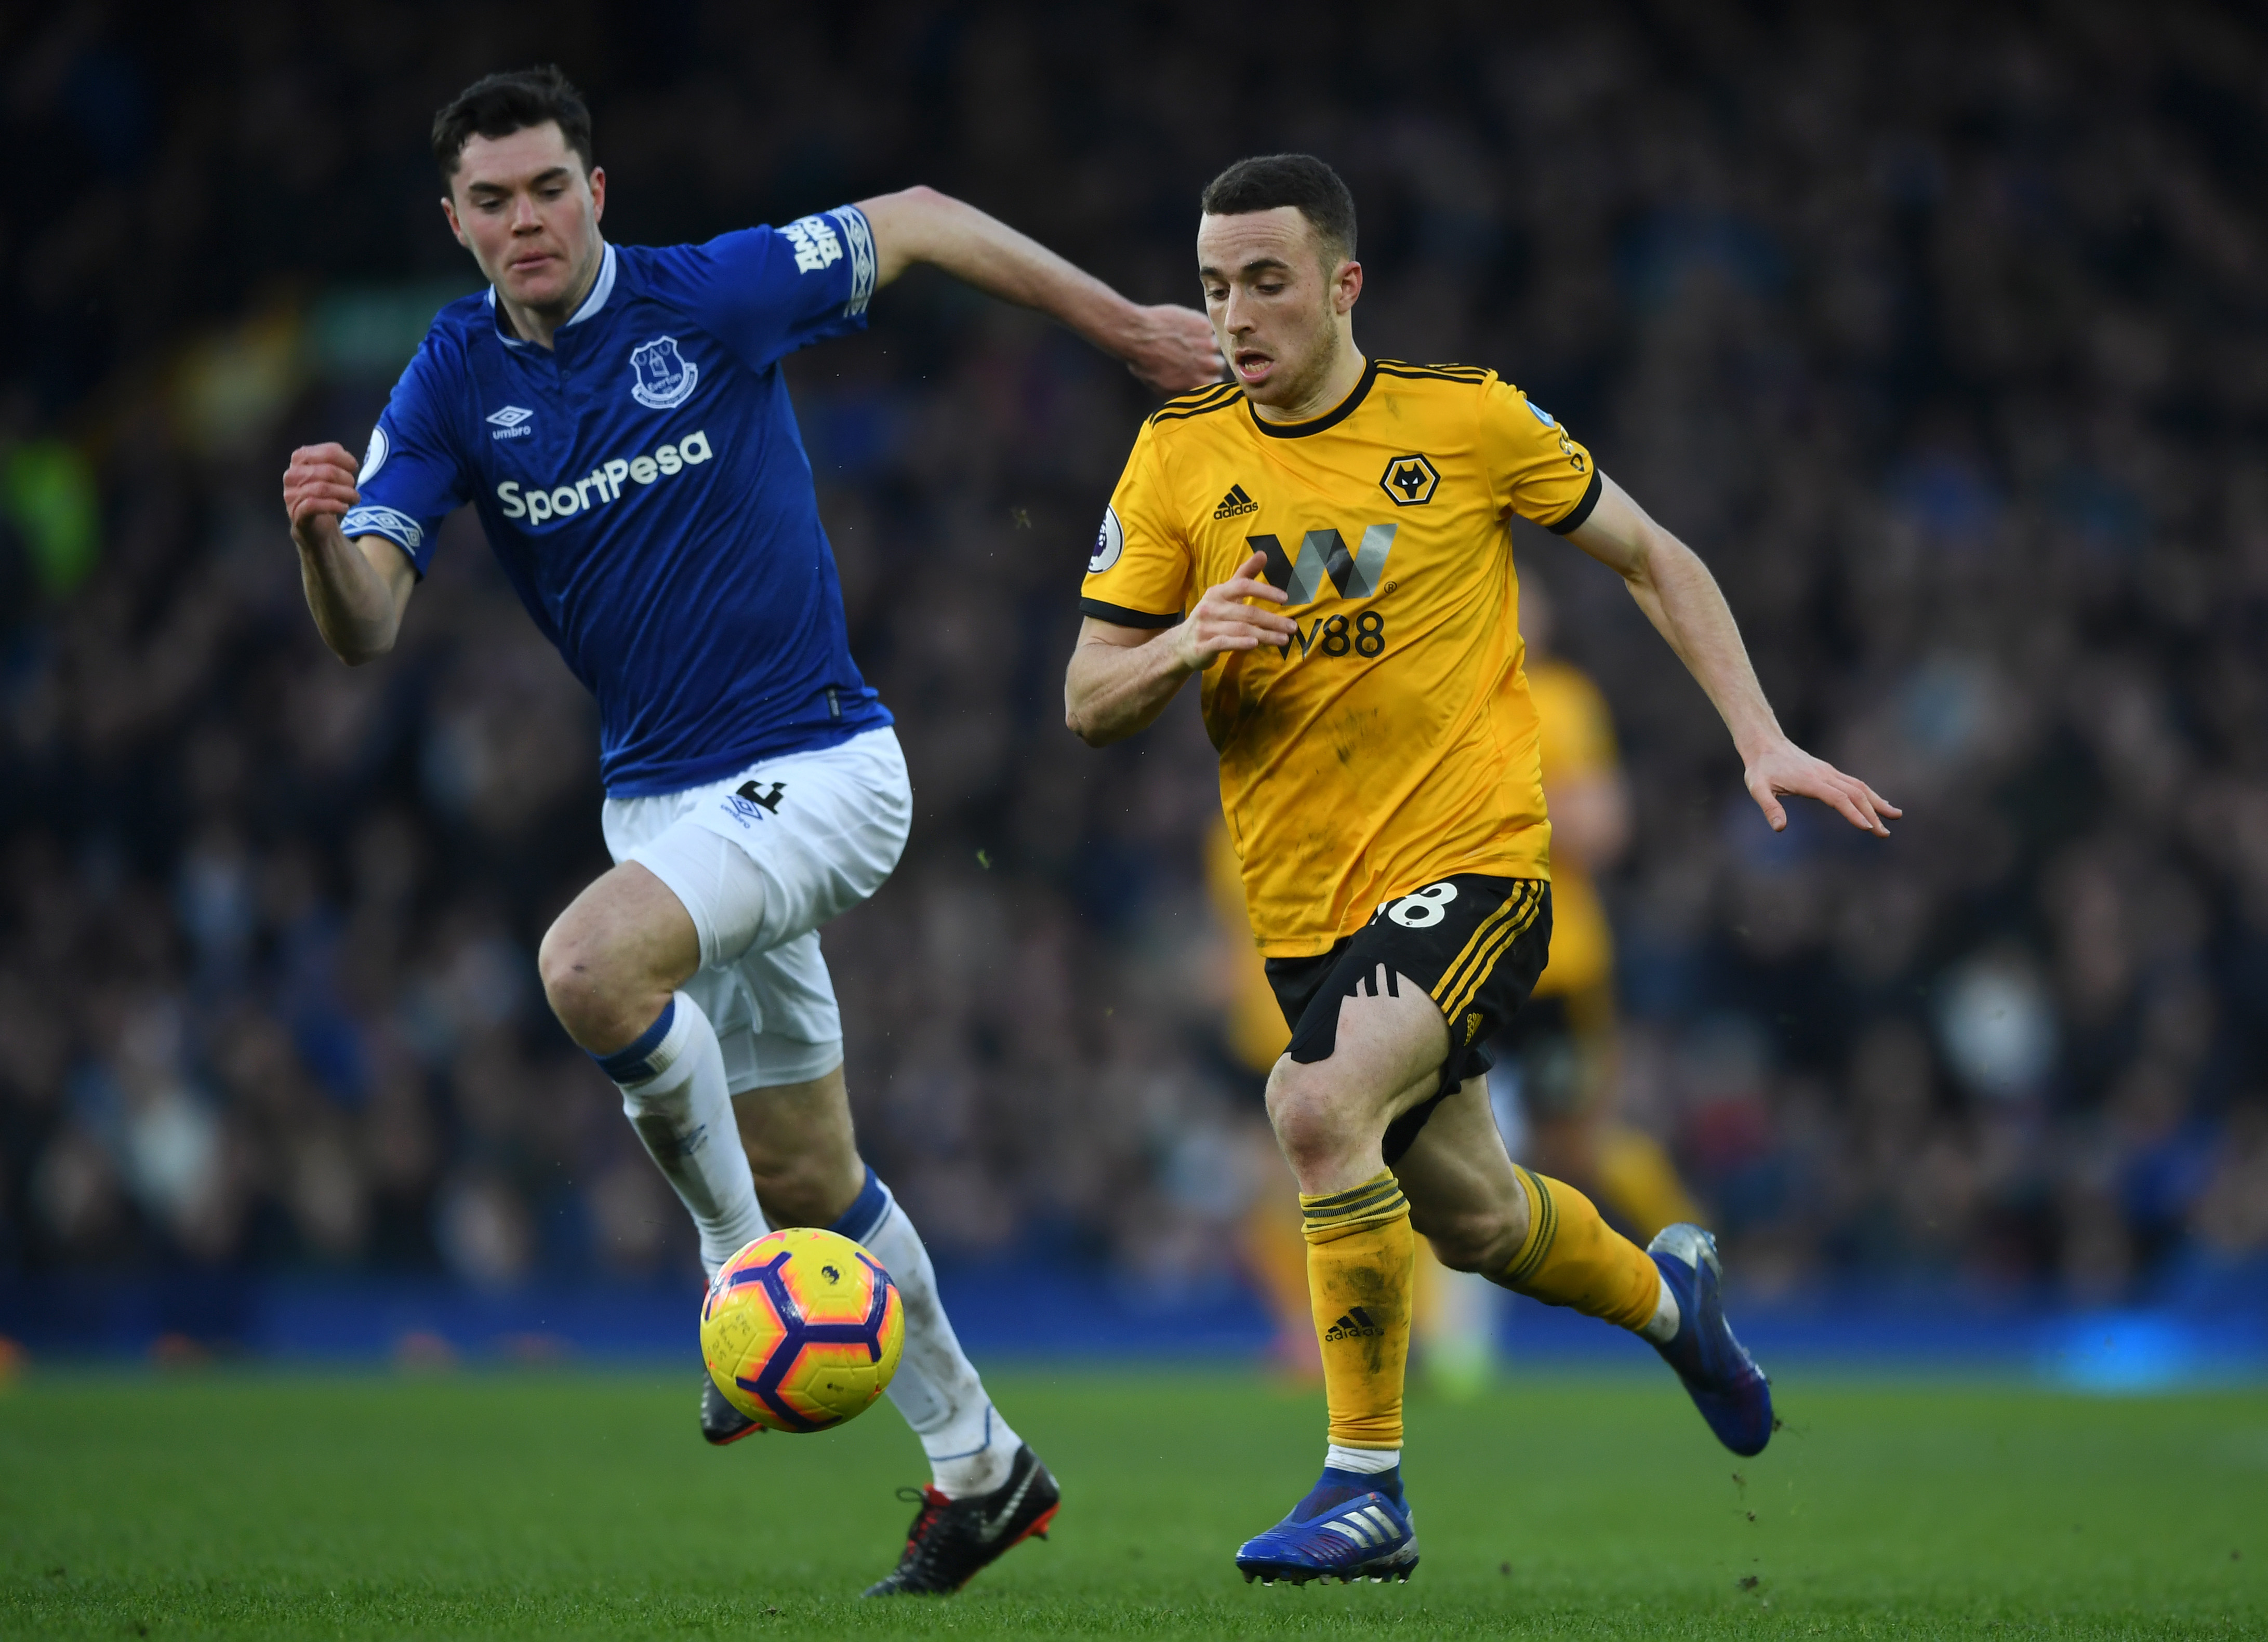 LIVERPOOL, ENGLAND - FEBRUARY 02: Diogo Jota of Wolverhampton Wanderers gets away from Michael Keane of Everton during the Premier League match between Everton FC and Wolverhampton Wanderers at Goodison Park on February 2, 2019 in Liverpool, United Kingdom.  (Photo by Gareth Copley/Getty Images)